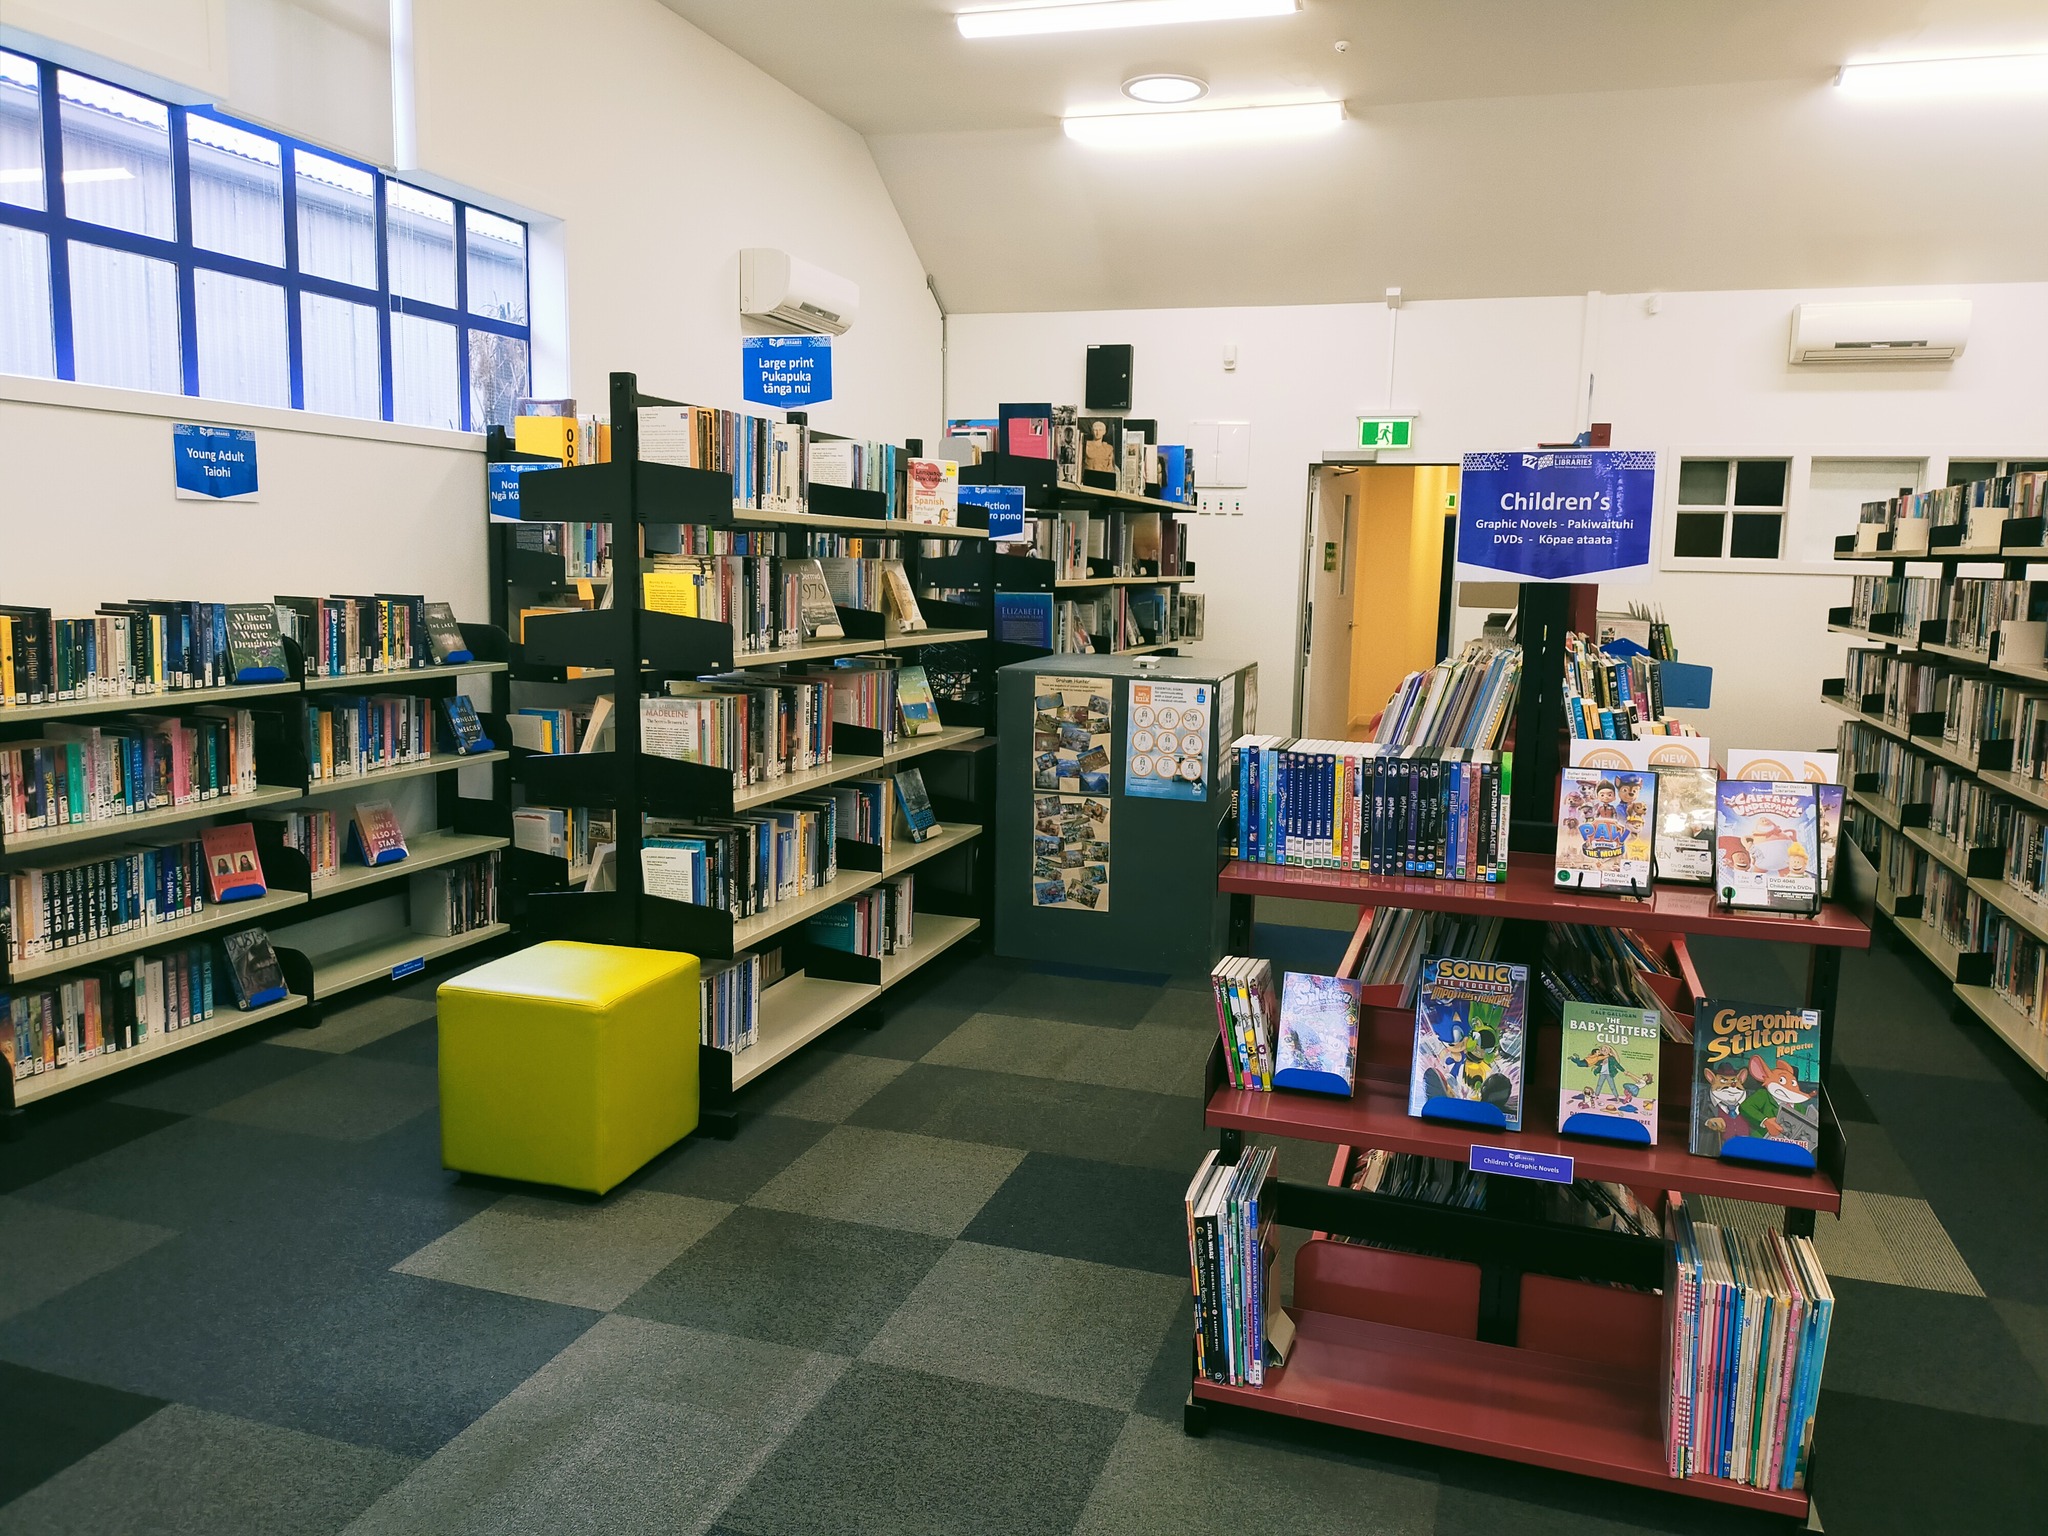 Book shelves at the Reefton Library